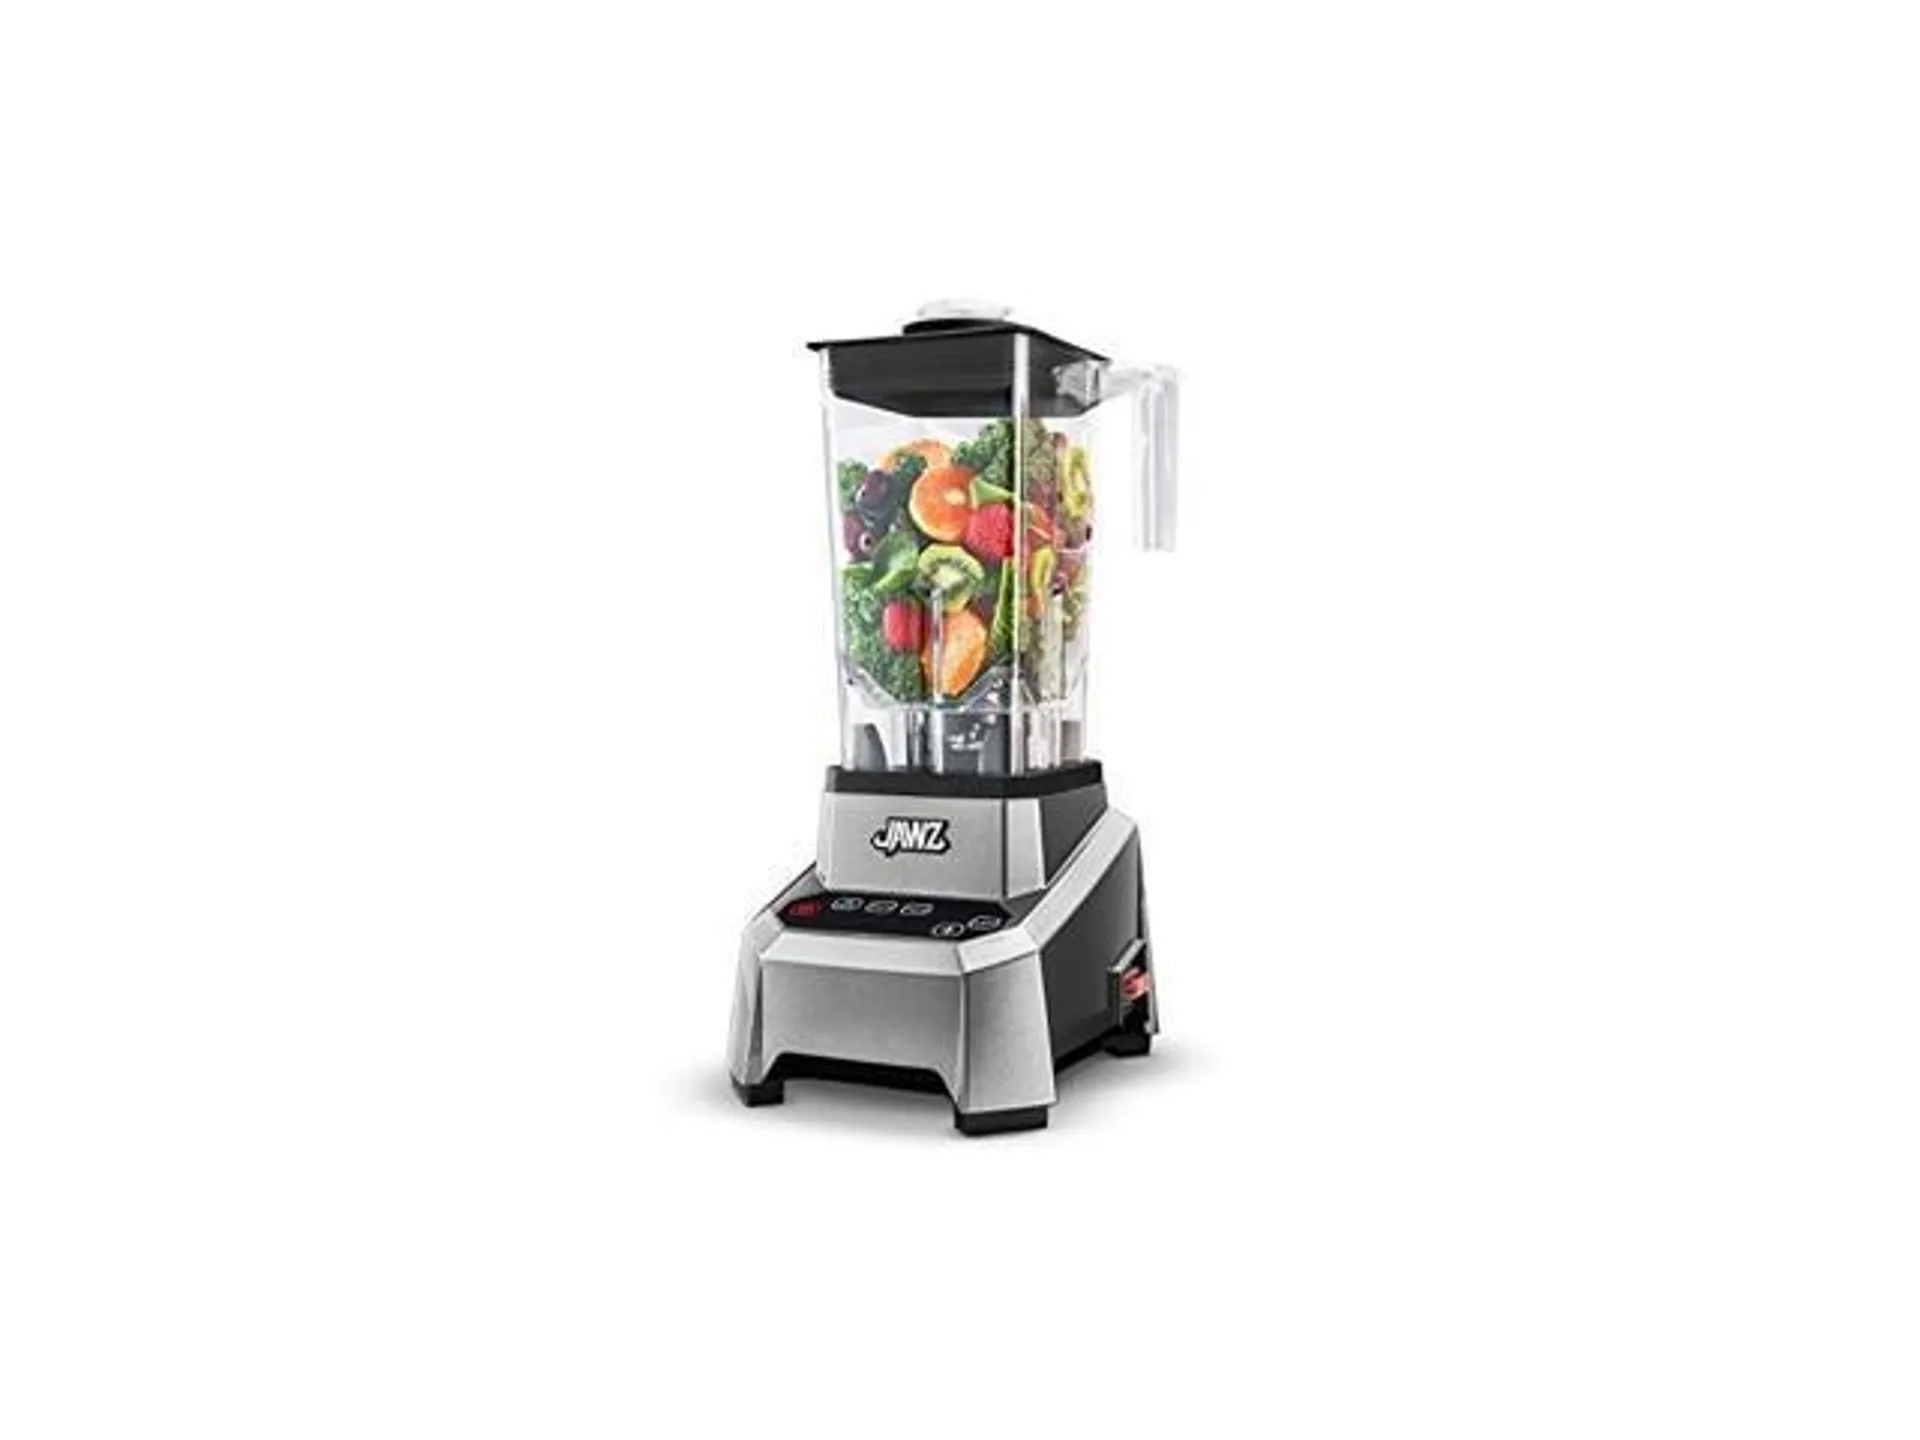 High Performance Blender, 64 Oz Professional Grade Countertop Blender, Juicer, Smoothie or Nut Butter Maker, Precision Smart Touch Variable Speed, Stainless Steel Blades, Silver